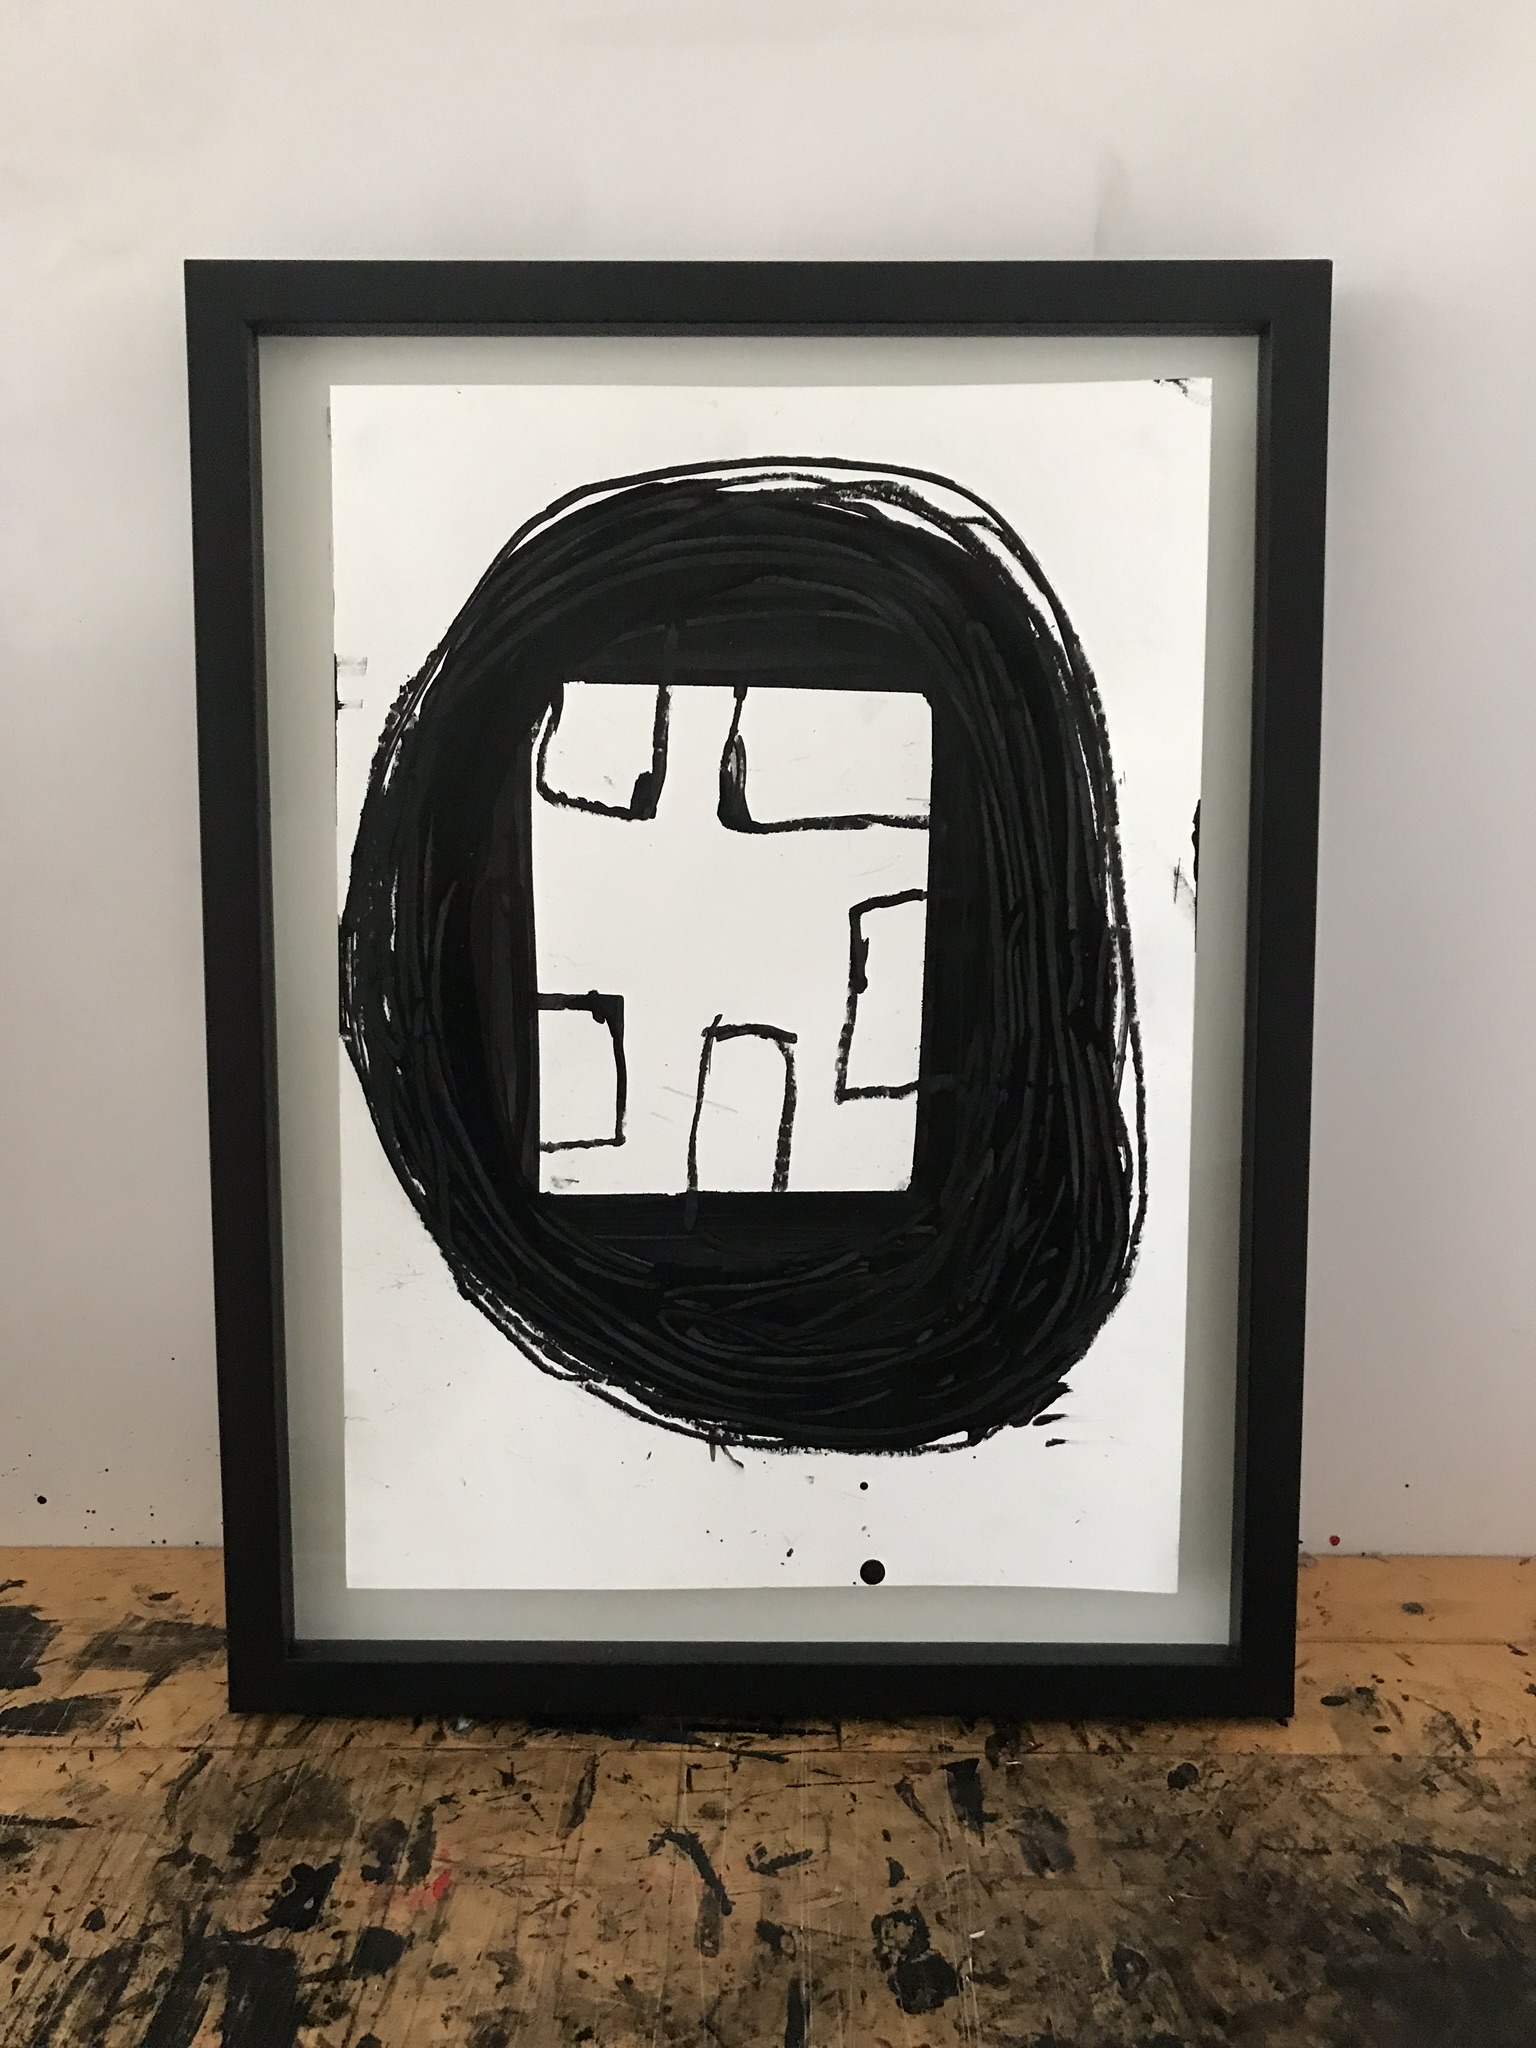 drawings, abstract, graphical, minimalistic, bodies, patterns, people, black, acrylic, crayons, abstract-forms, black-and-white, contemporary-art, danish, decorative, design, interior, interior-design, modern, modern-art, nordic, scandinavien, Buy original high quality art. Paintings, drawings, limited edition prints & posters by talented artists.